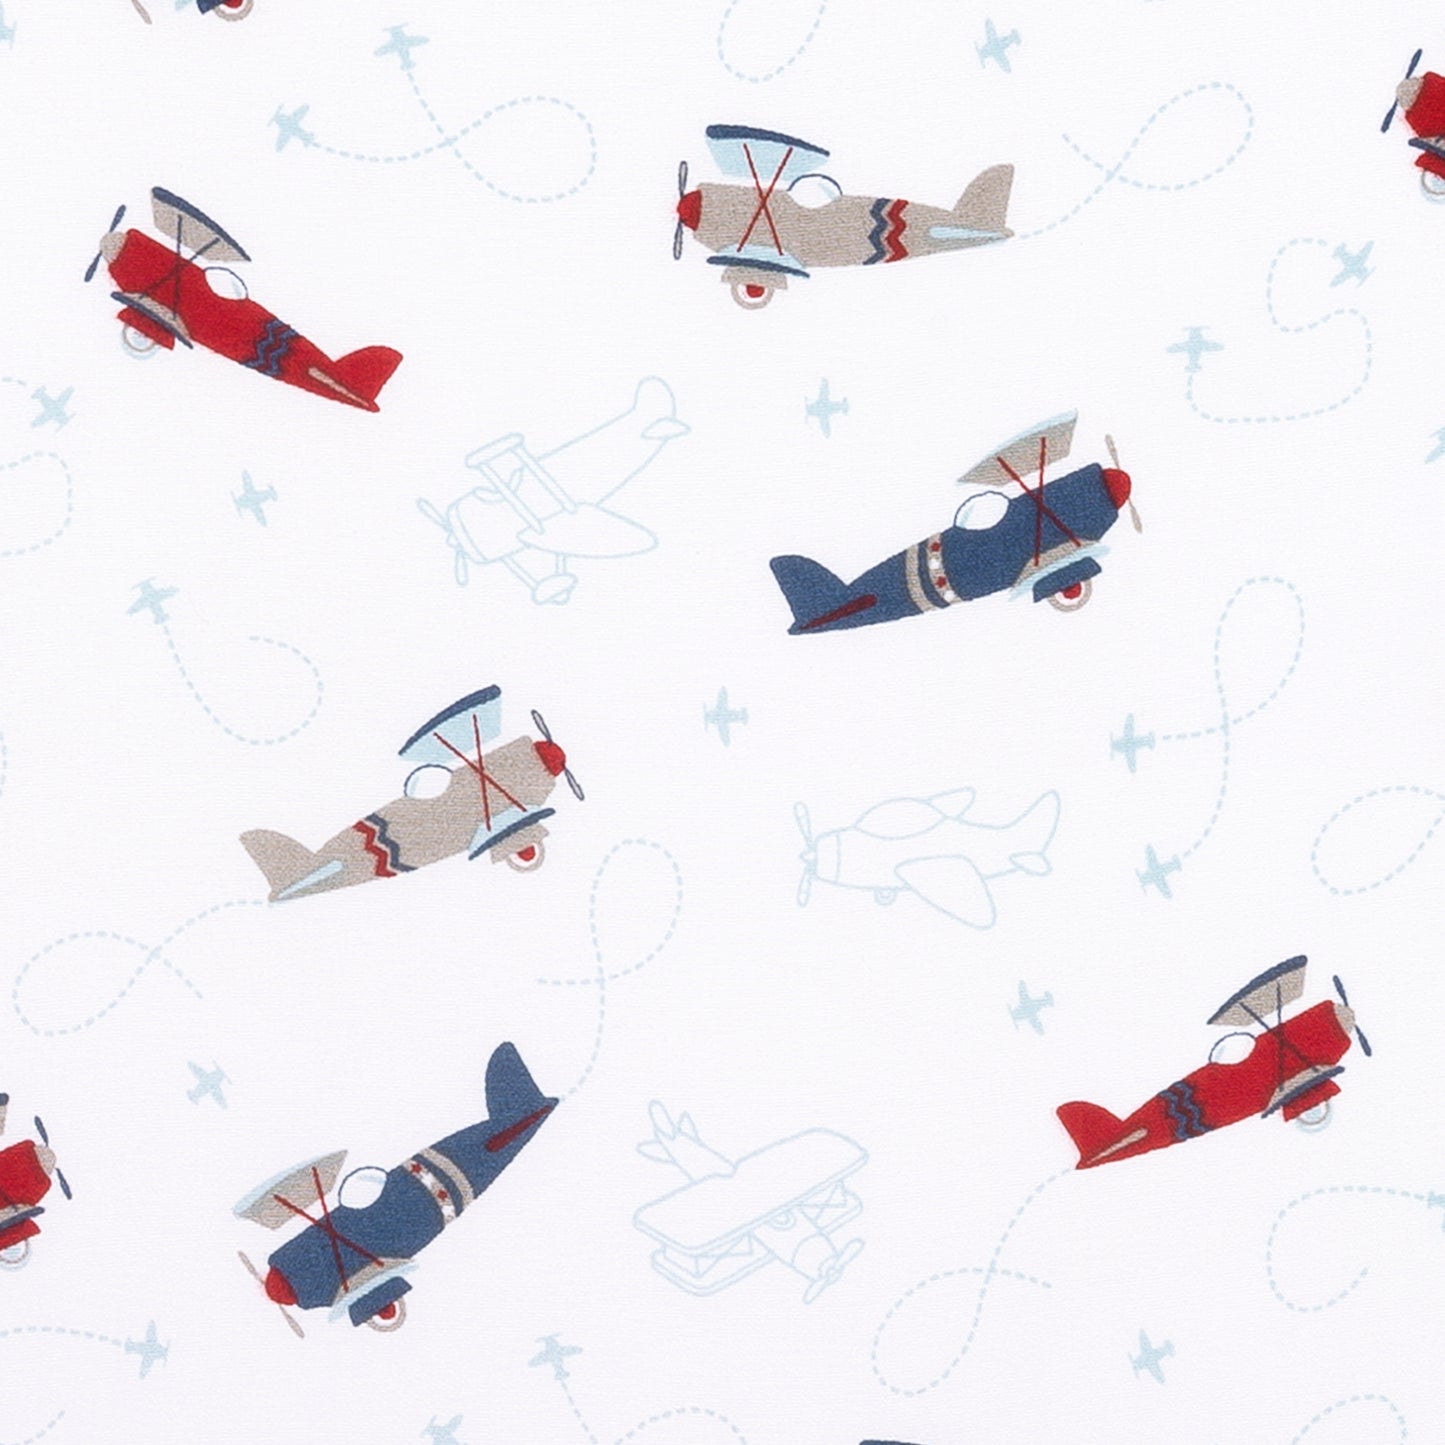 Swatch View of Sammy and Lou Adventure Awaits 4 Piece Crib Bedding Set Crib Sheet that features Red and Navy Airplanes